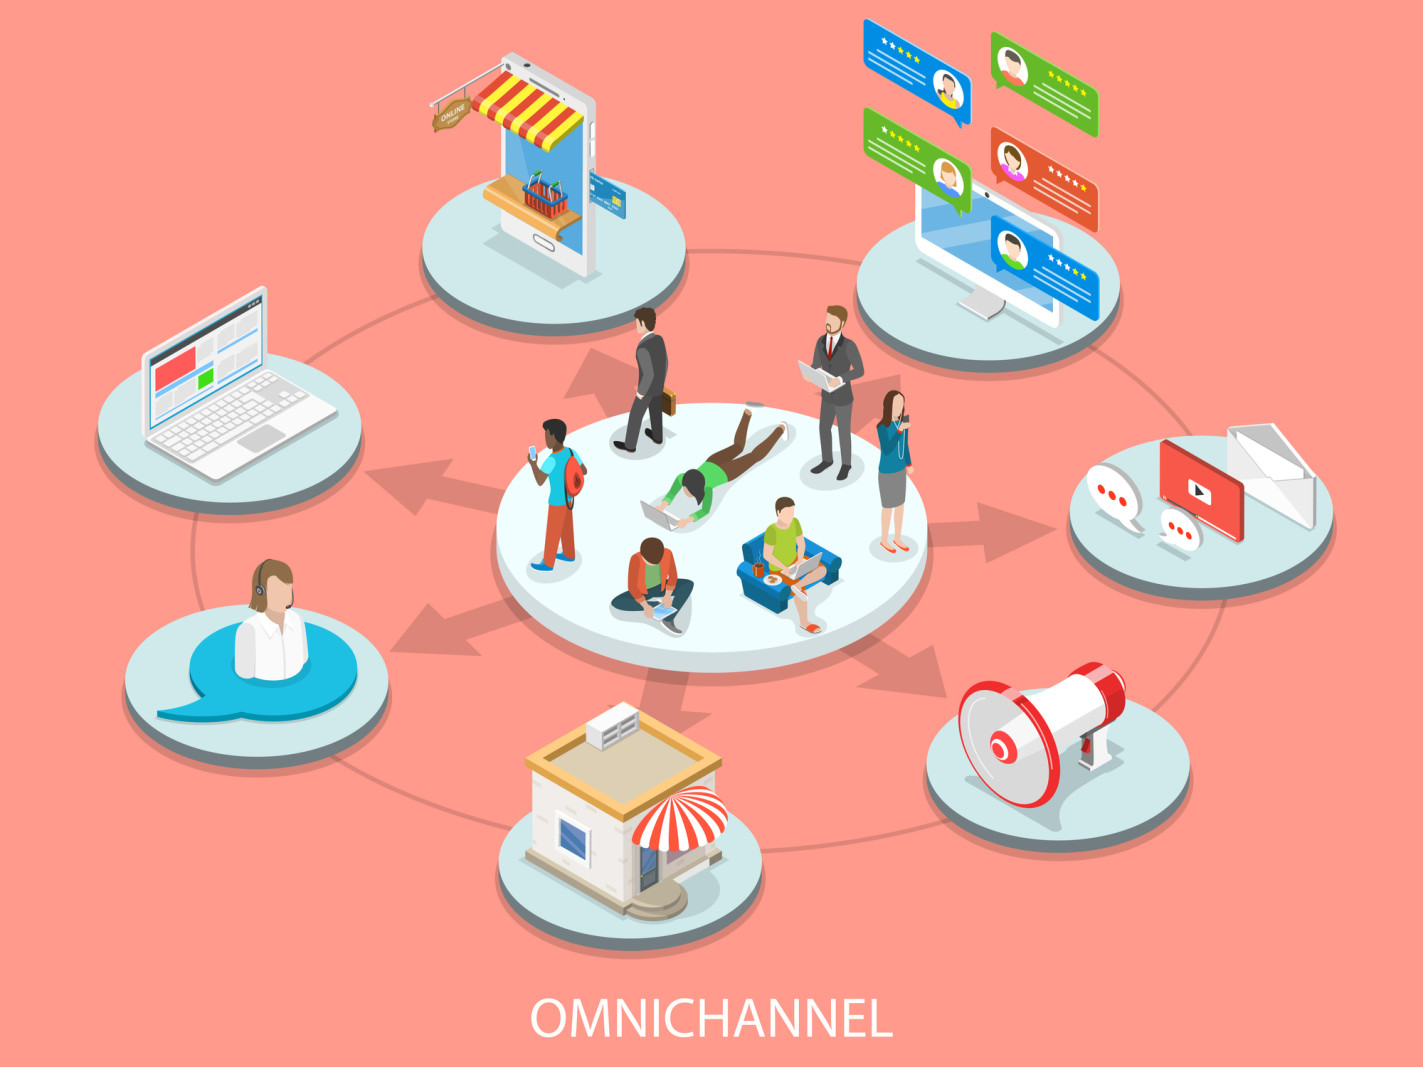 Vector image displaying the many assets of omnichannel marketing.